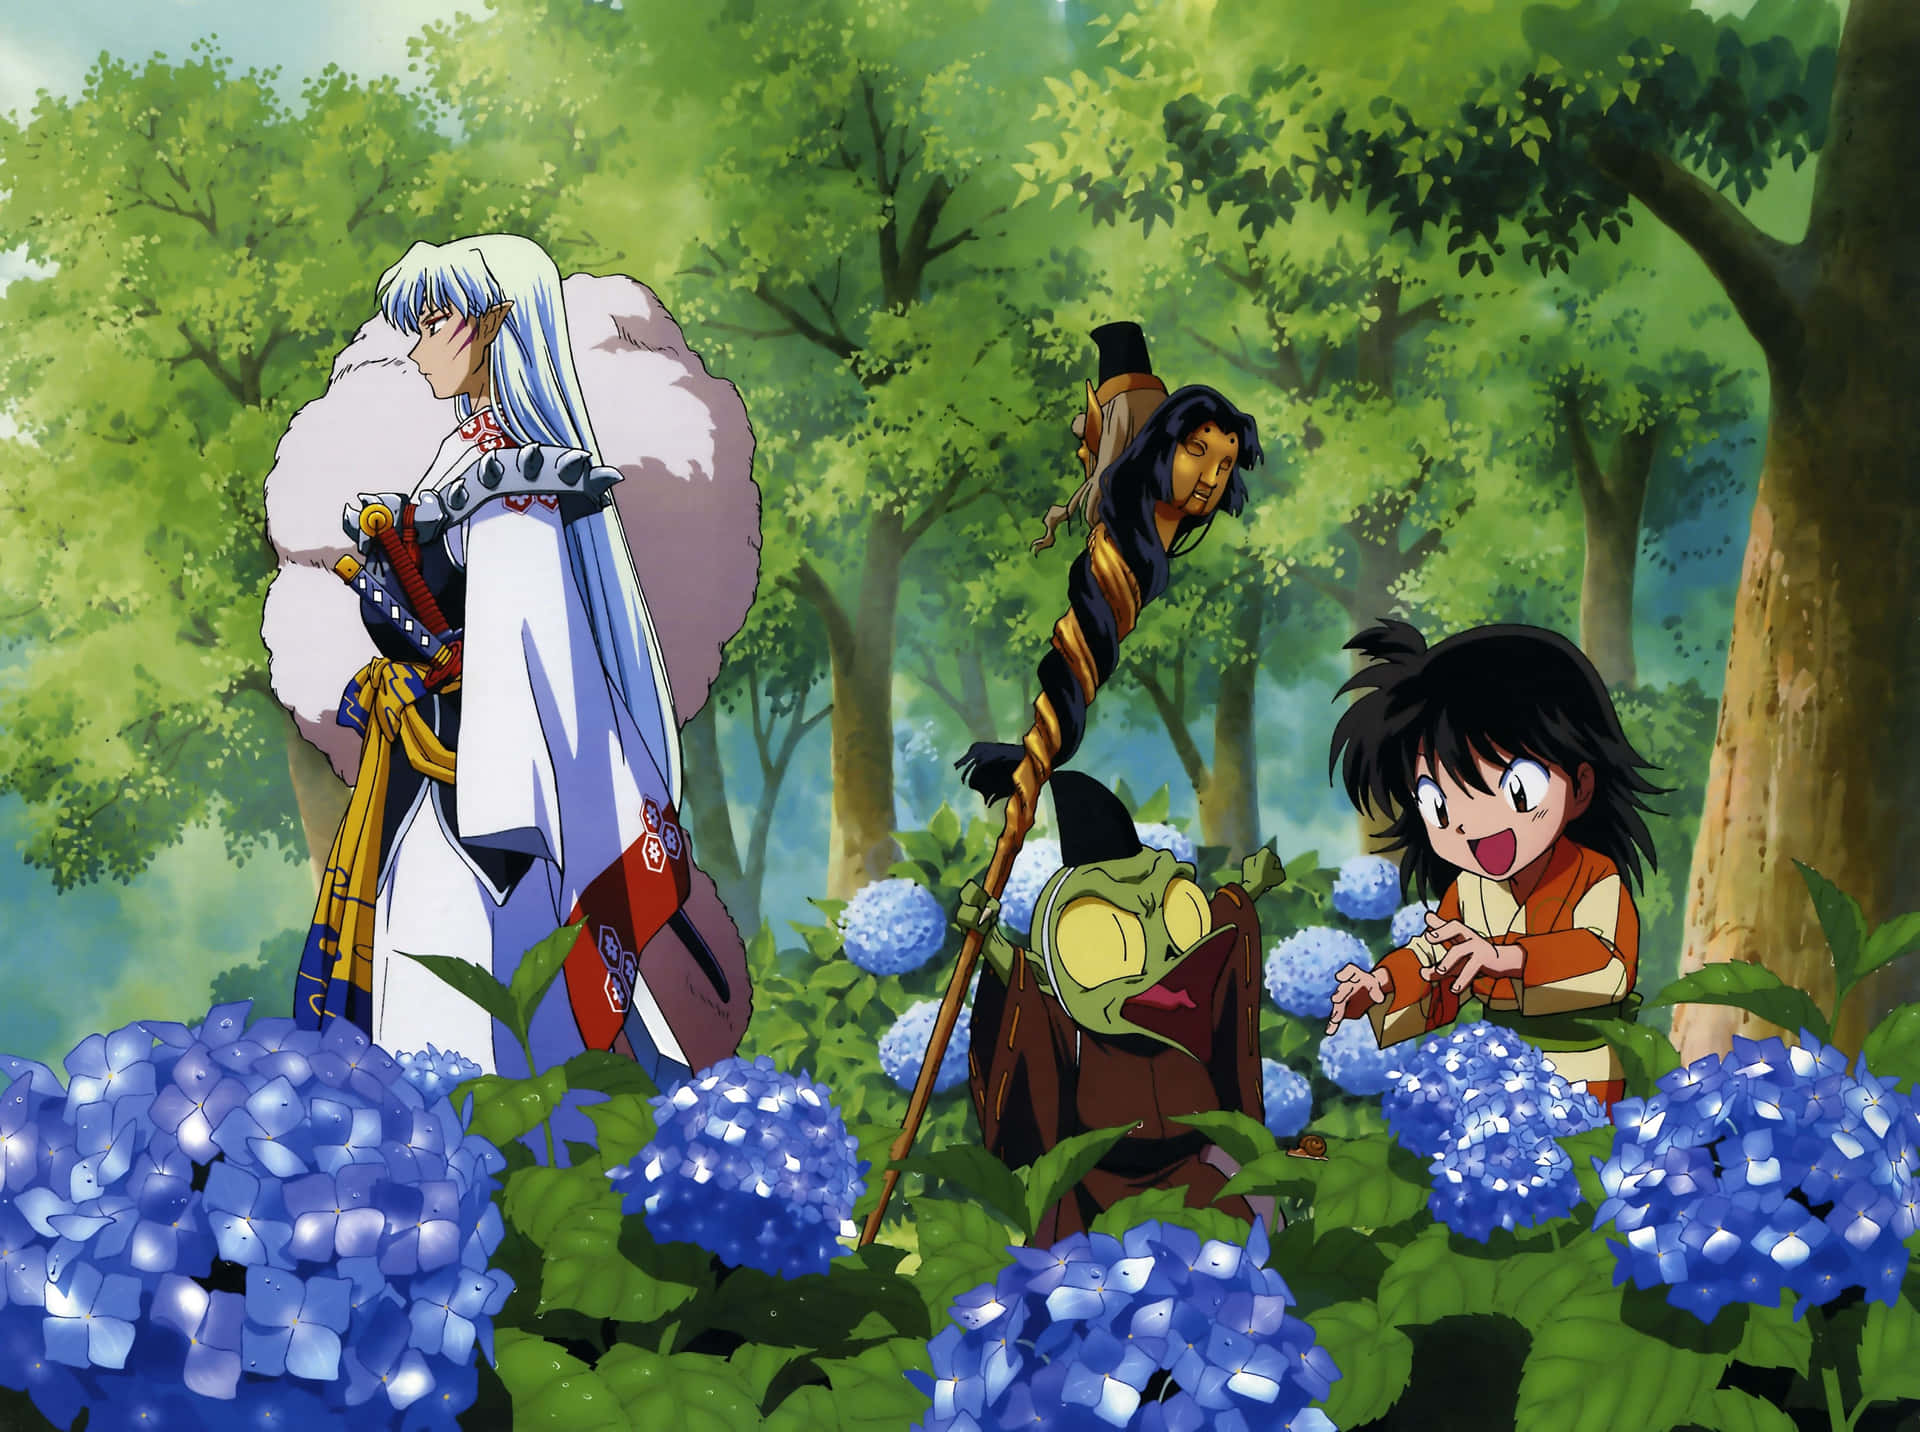 Join Inuyasha and his companions on a thrilling journey through Japan's feudal era! Wallpaper